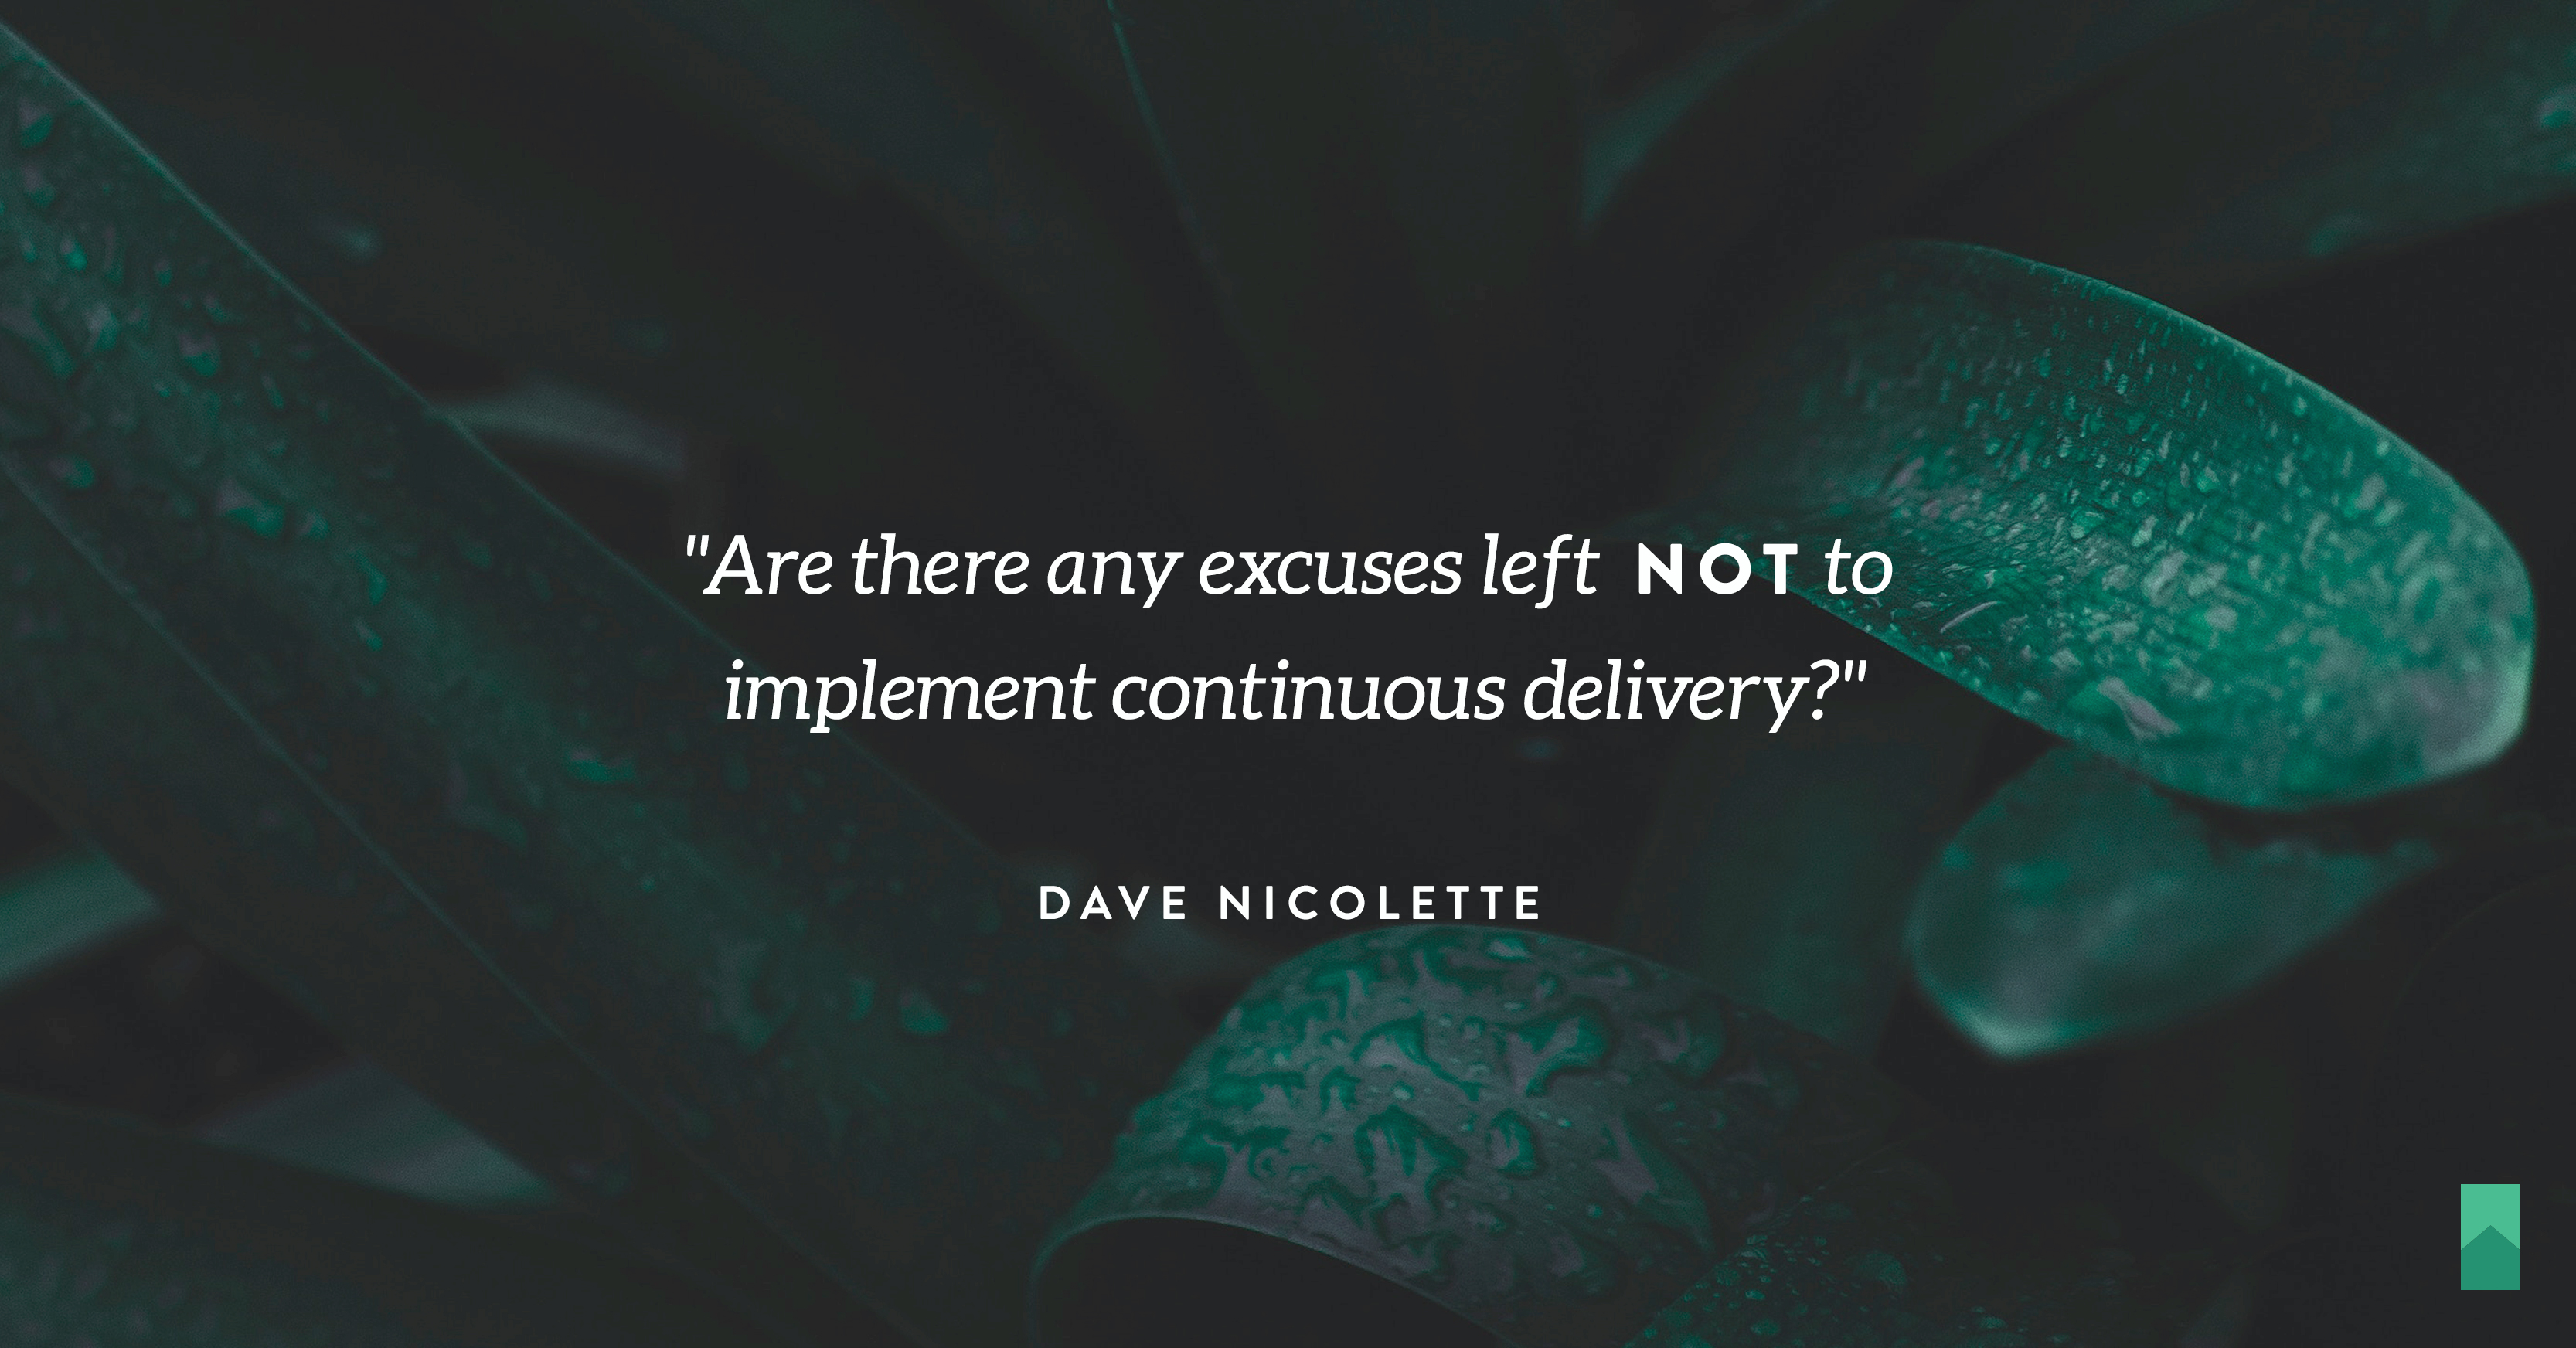 What’s the value of Continuous Delivery?